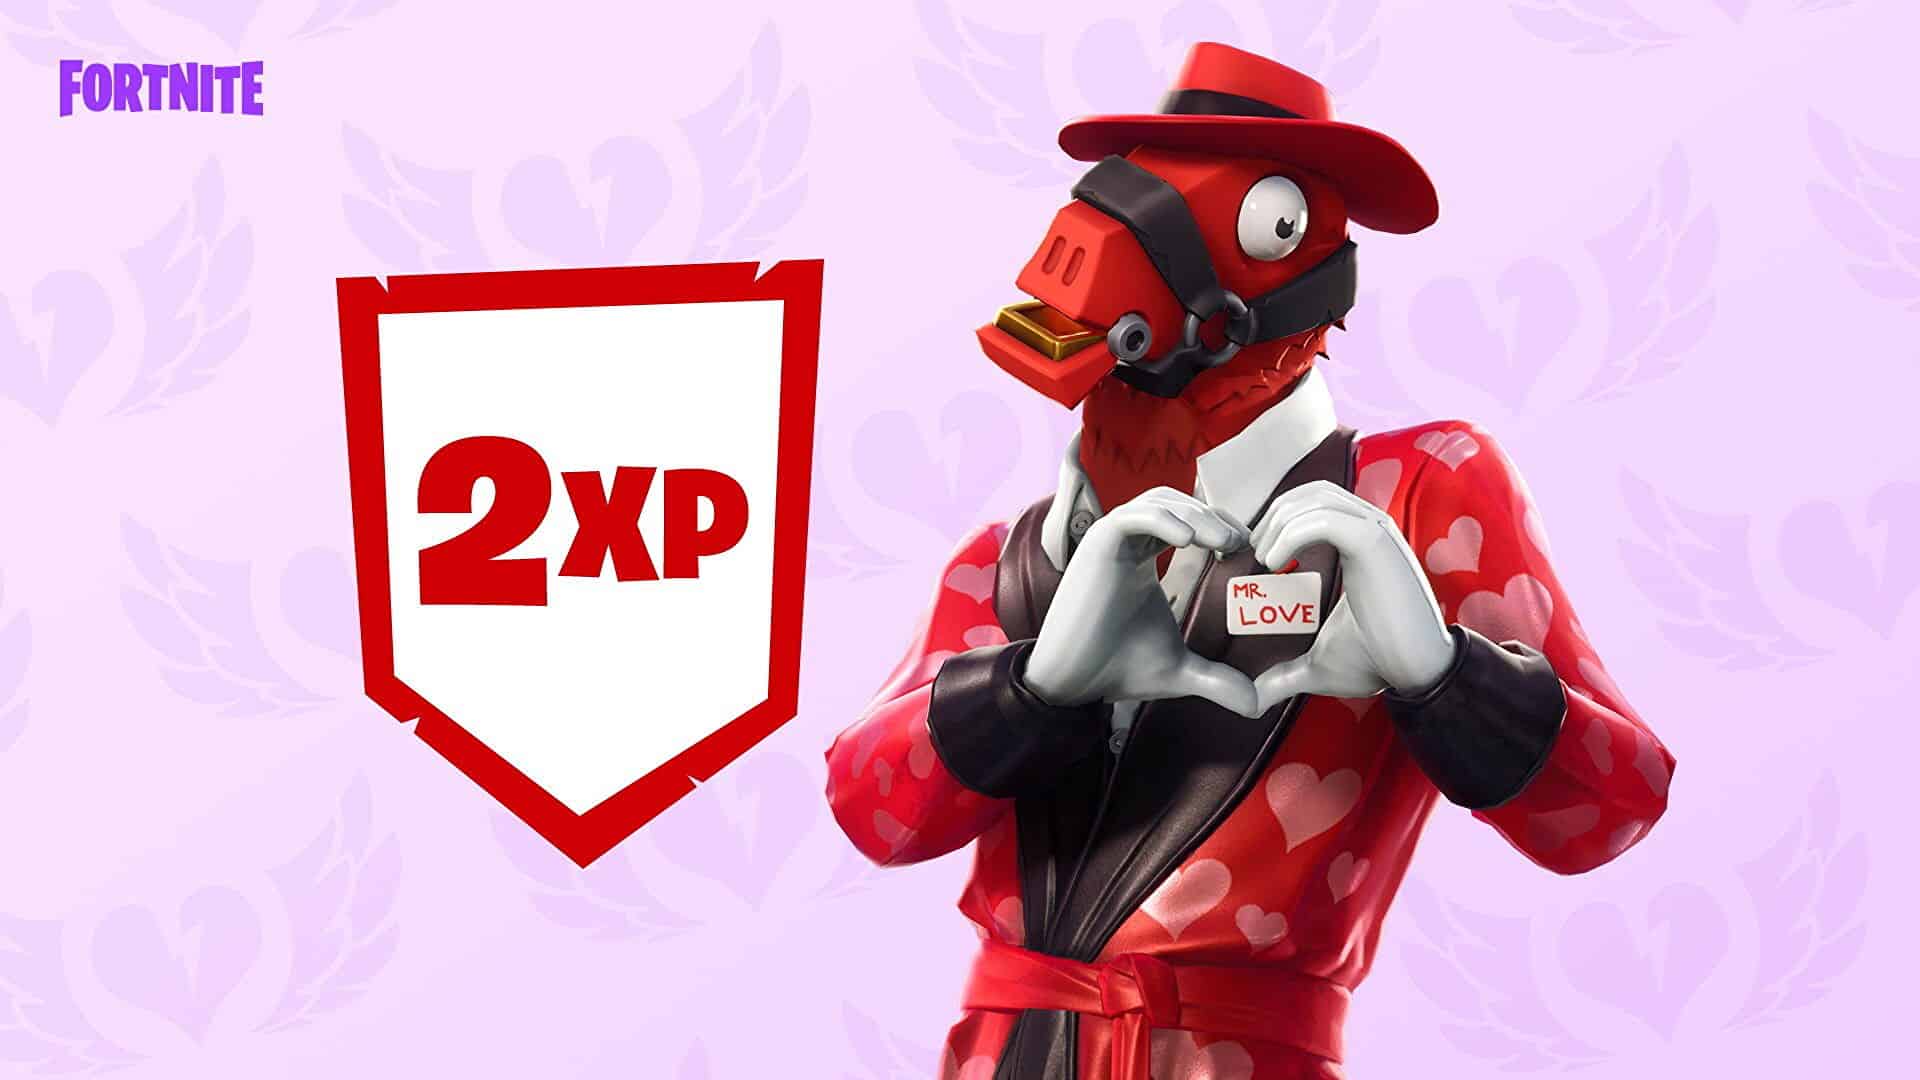 The Double XP weekend in Fortnite is a great way to earn more XP